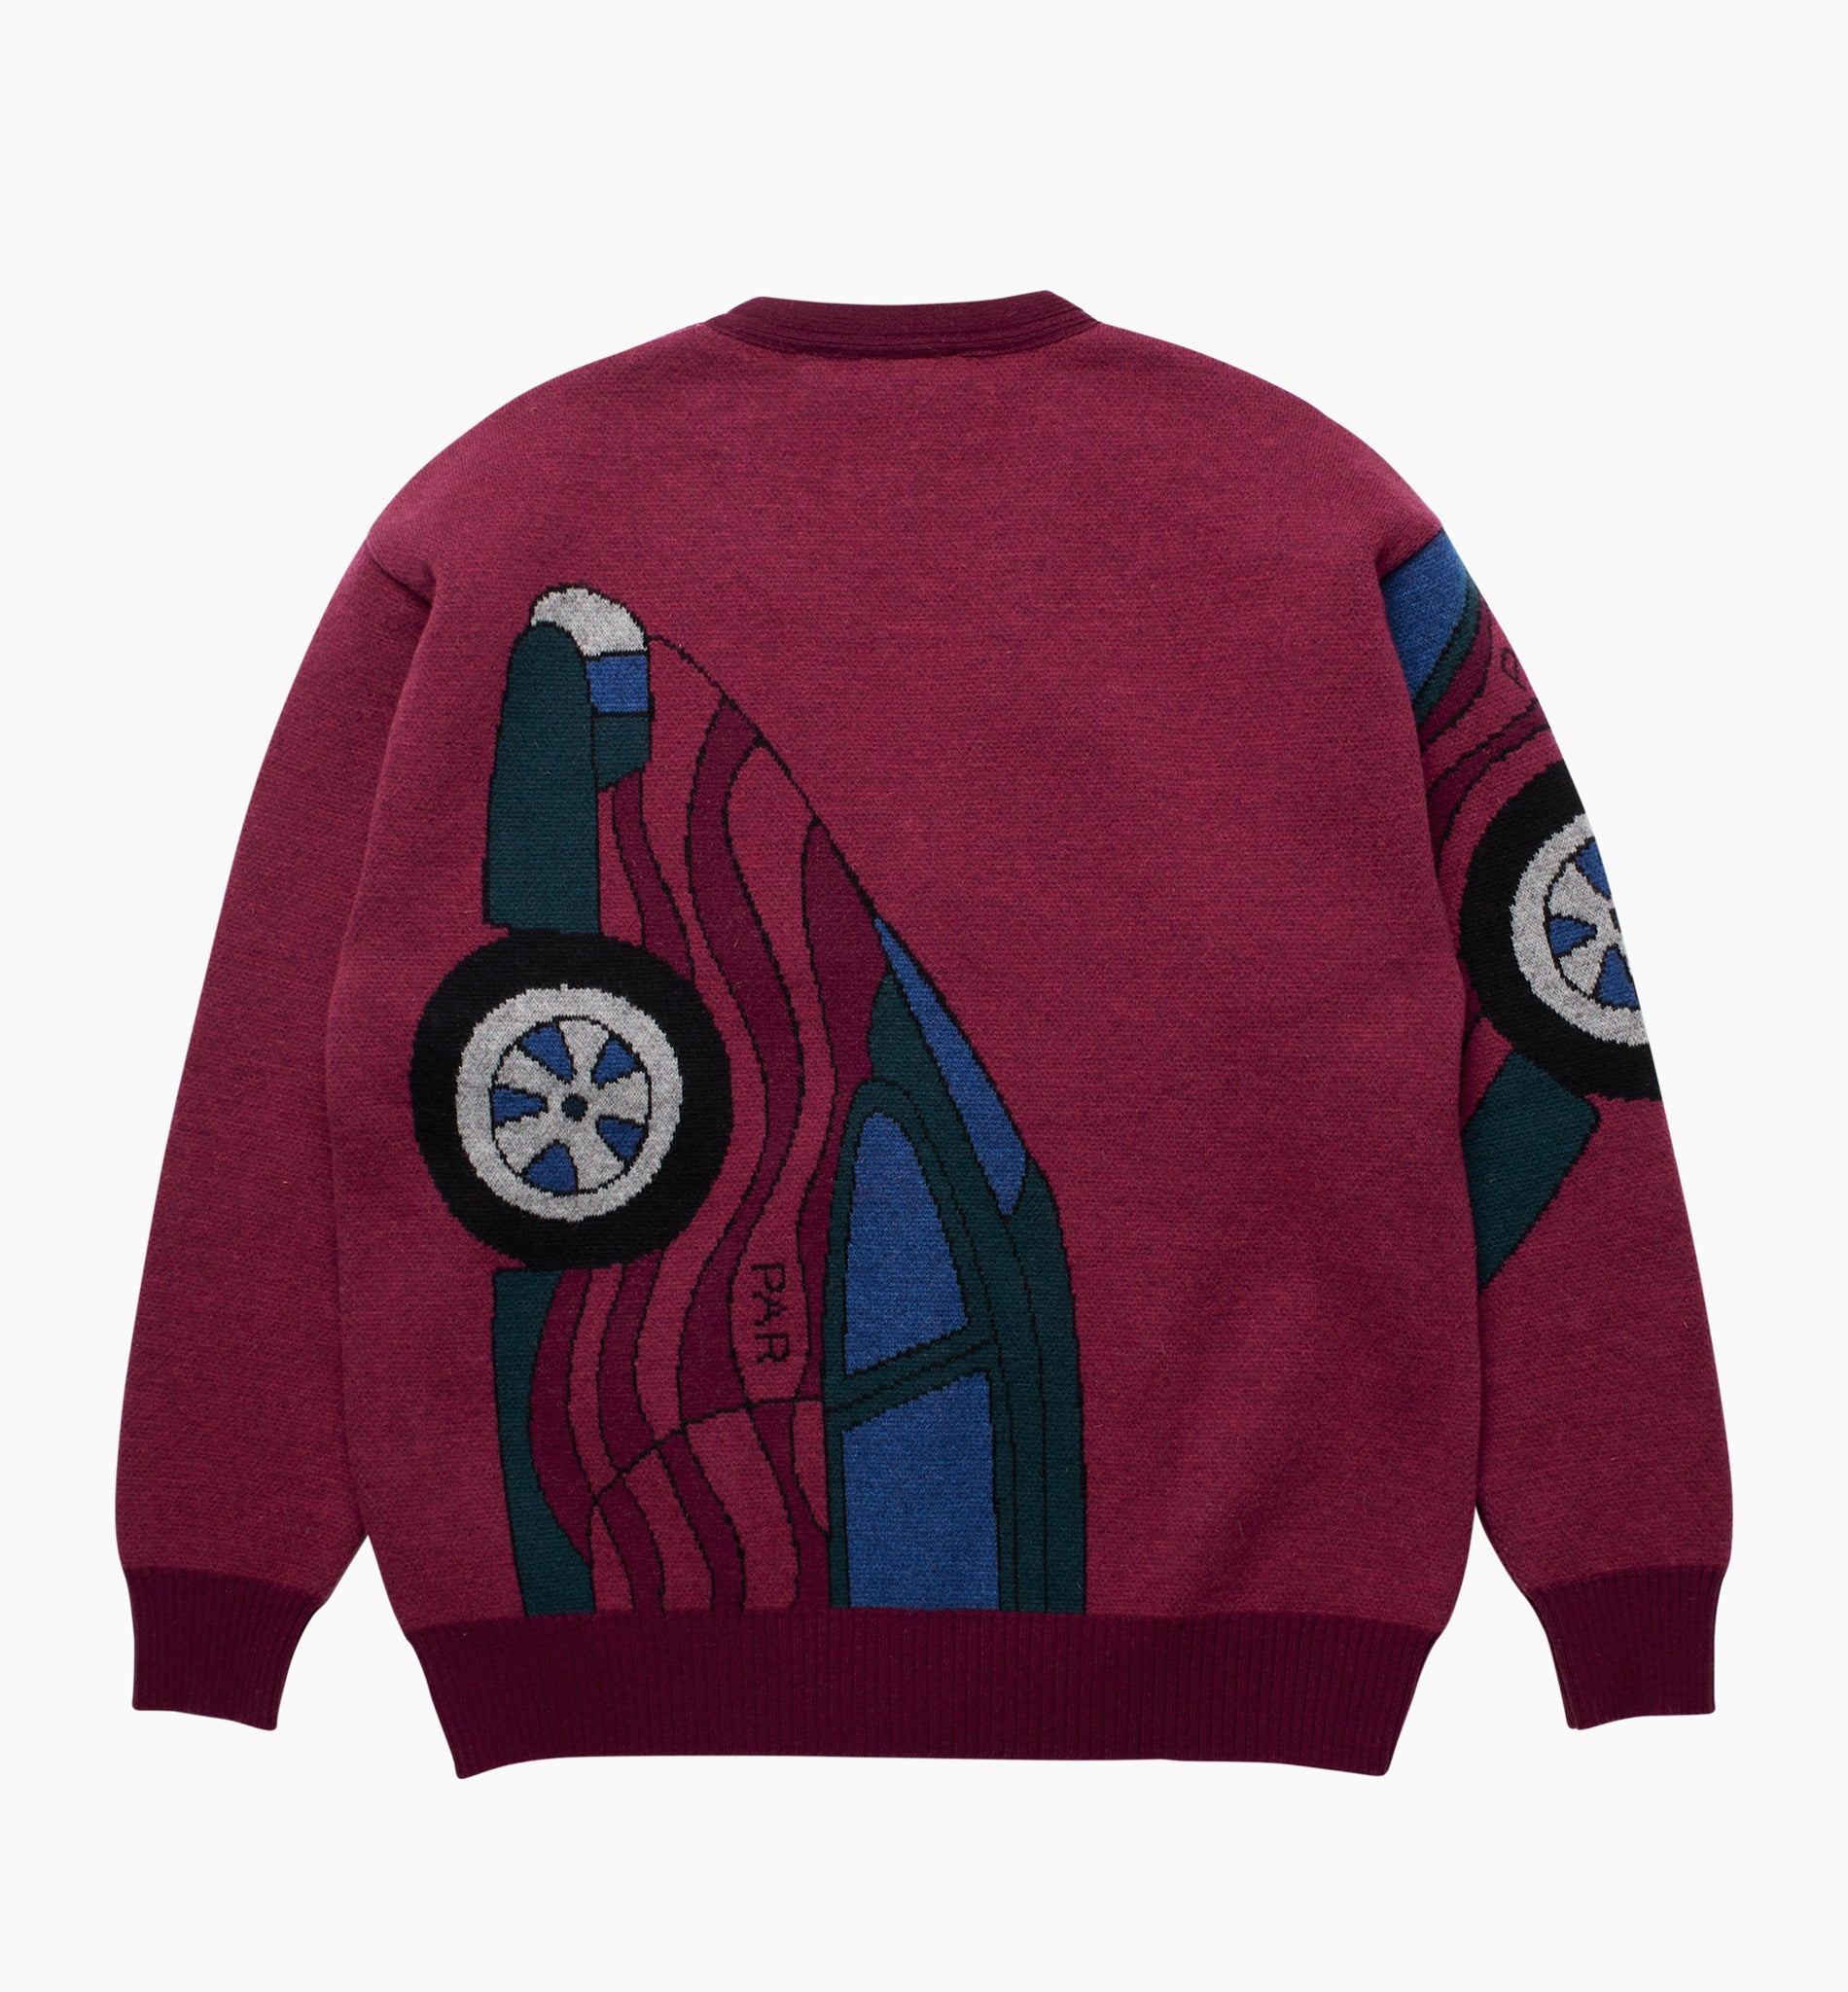 No Parking Knitted Cardigan